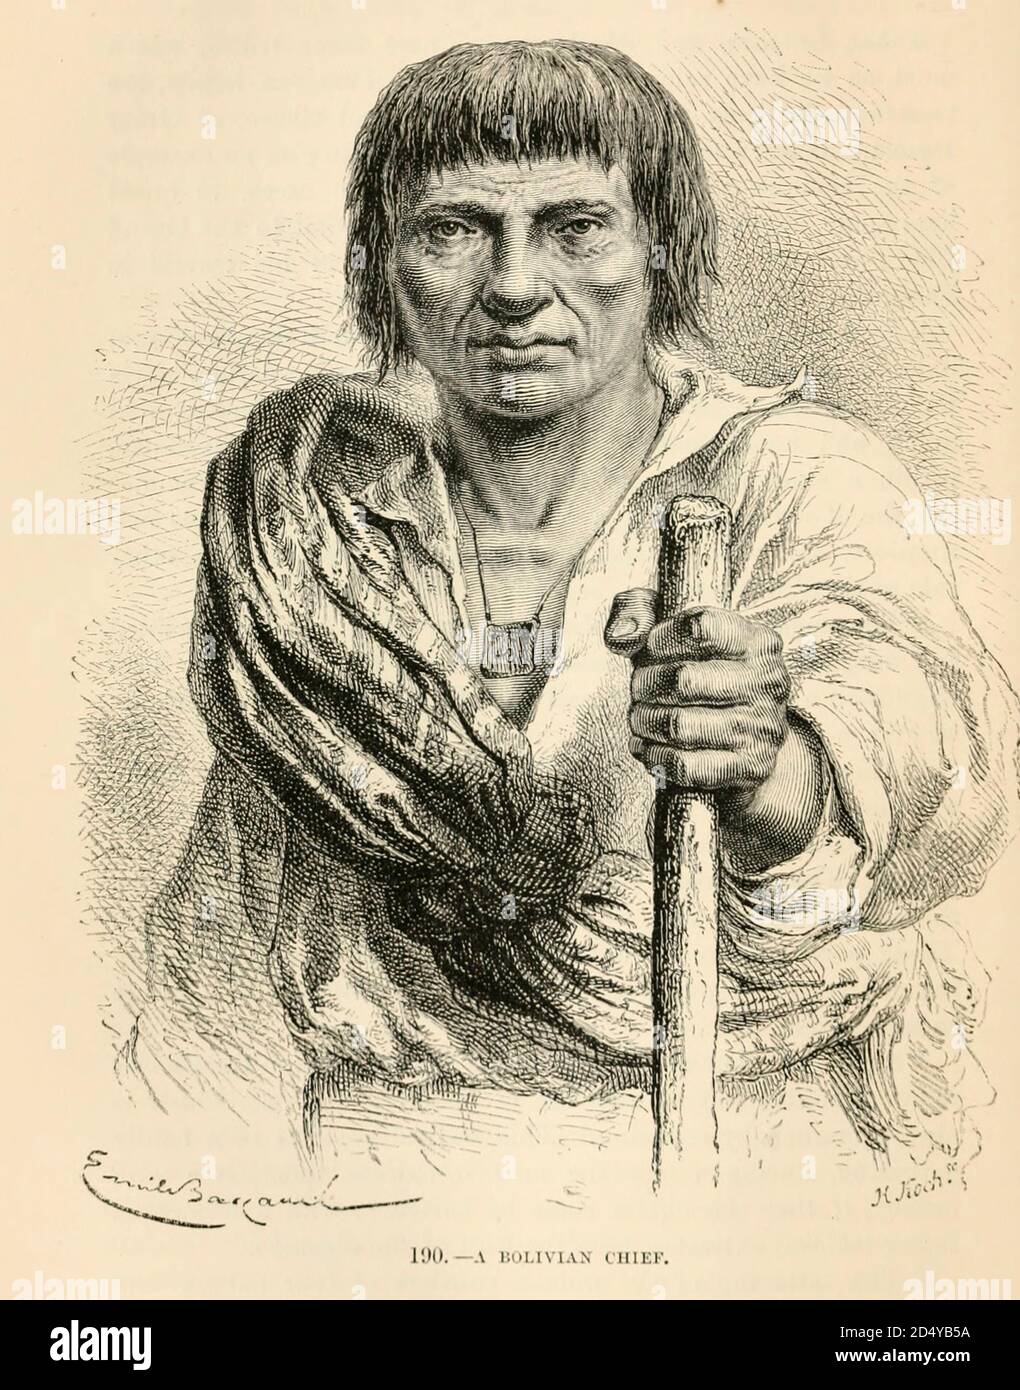 Bolivian Chief engraving on wood From The human race by Figuier, Louis, (1819-1894) Publication in 1872 Publisher: New York, Appleton Stock Photo